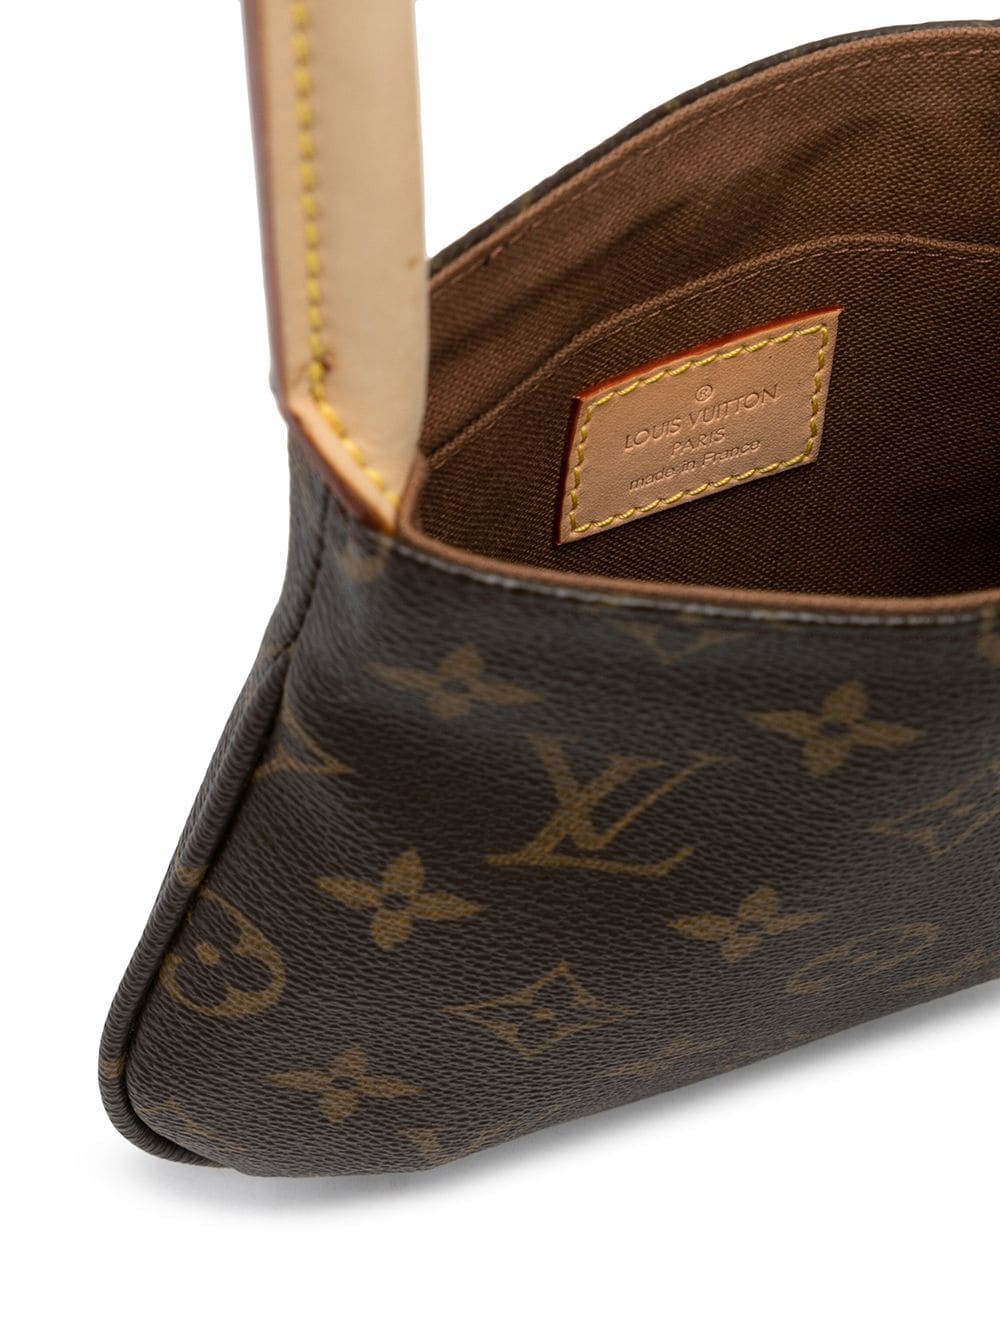 PRE-OWNED LOUIS VUITTON MONOGRAM CANVAS MINI LOOPING HAND